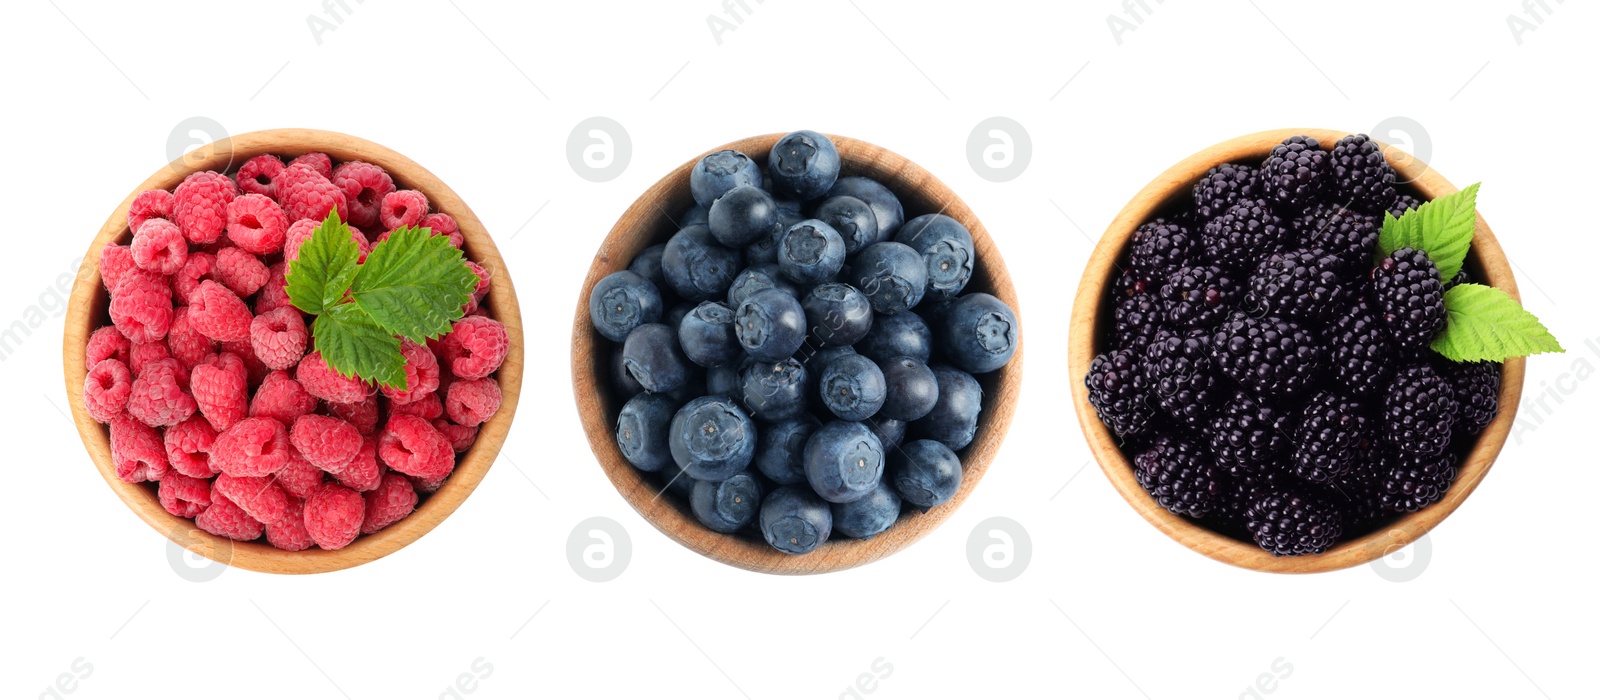 Image of Set of bowls with different fresh berries on white background, top view. Banner design